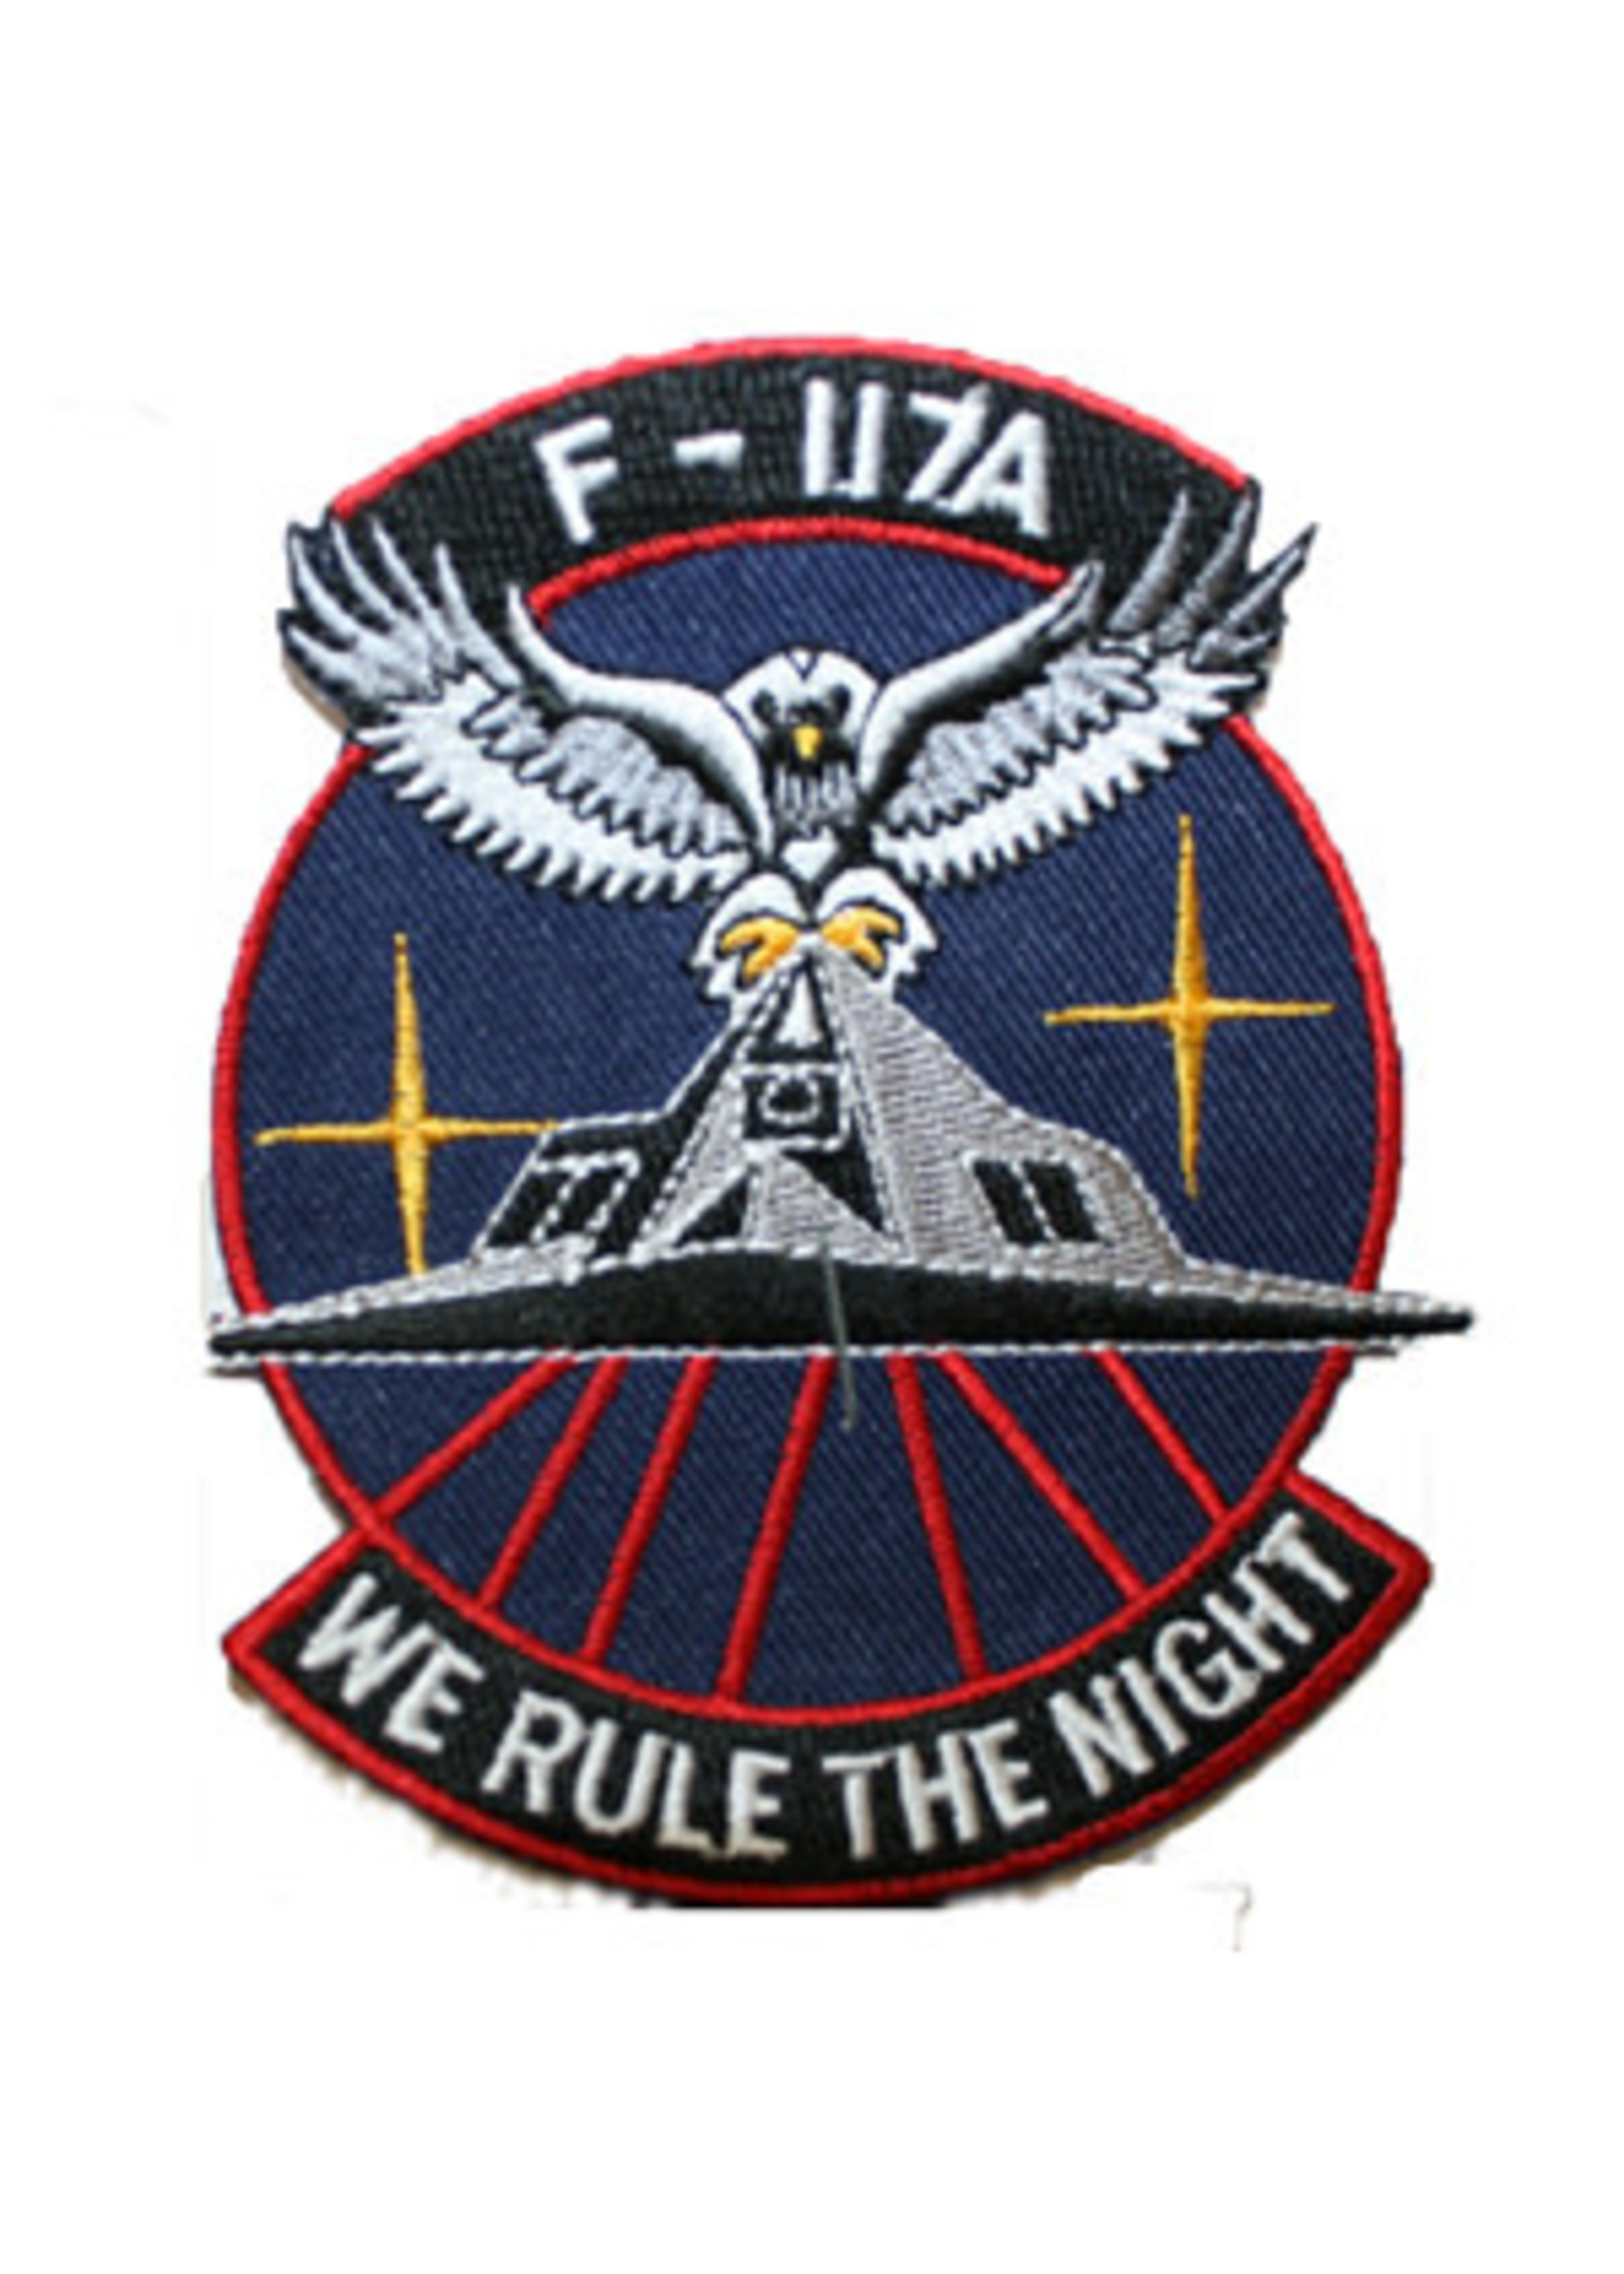 Robert Seifert Patches Patch F-117A We Rule the Night